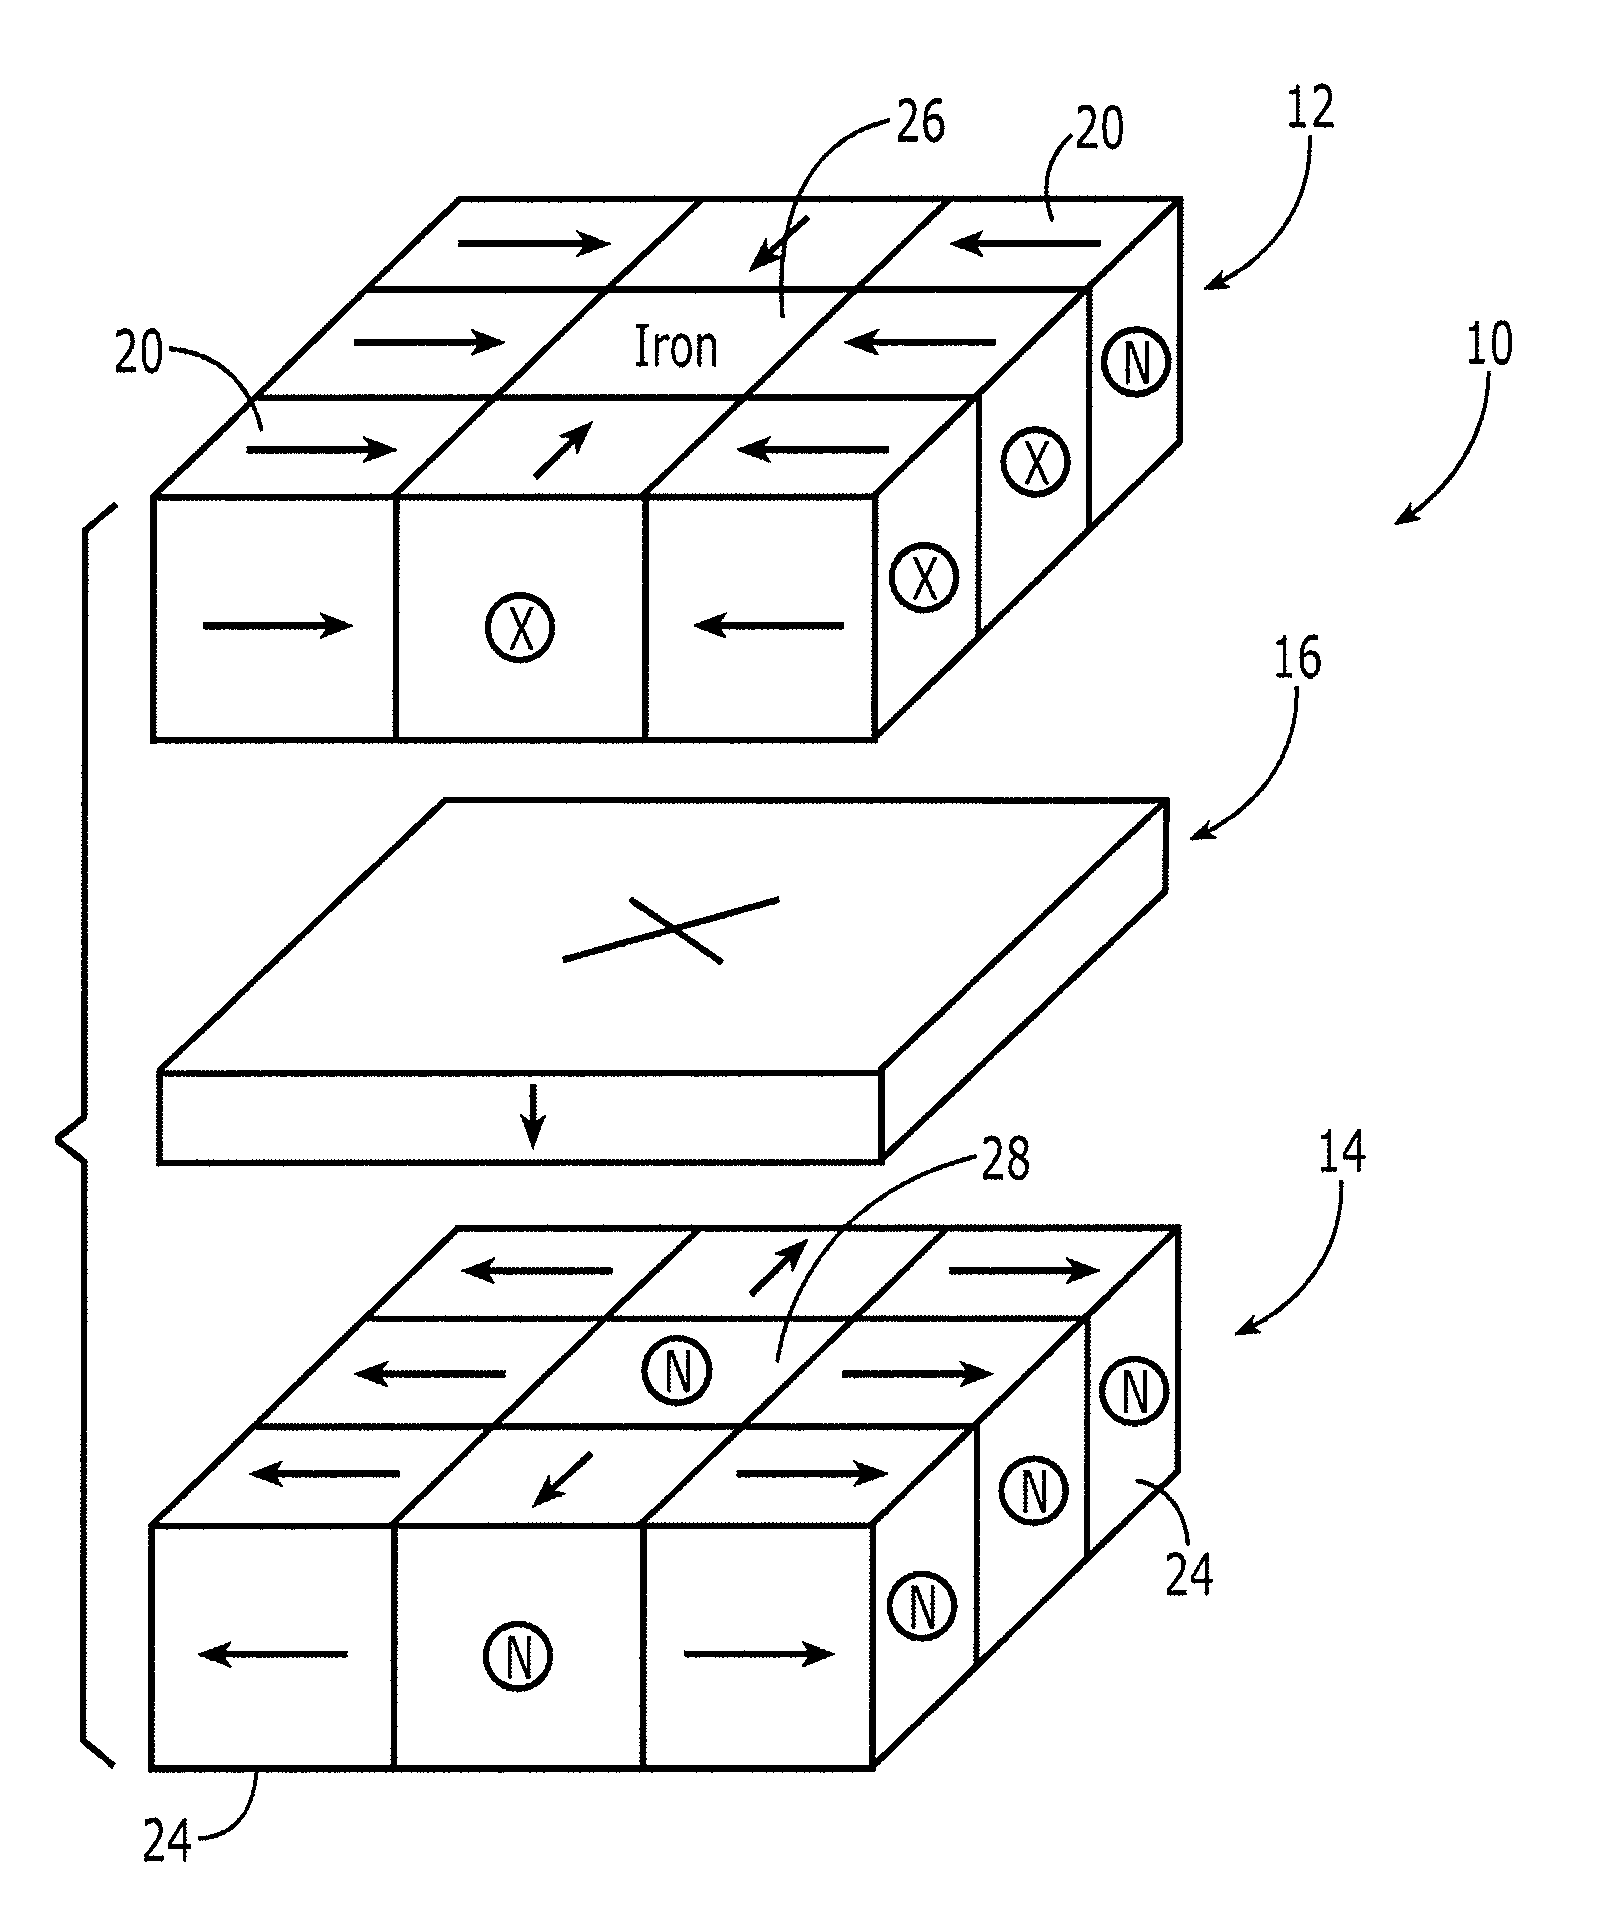 Three-dimensional magnet structure and associated method